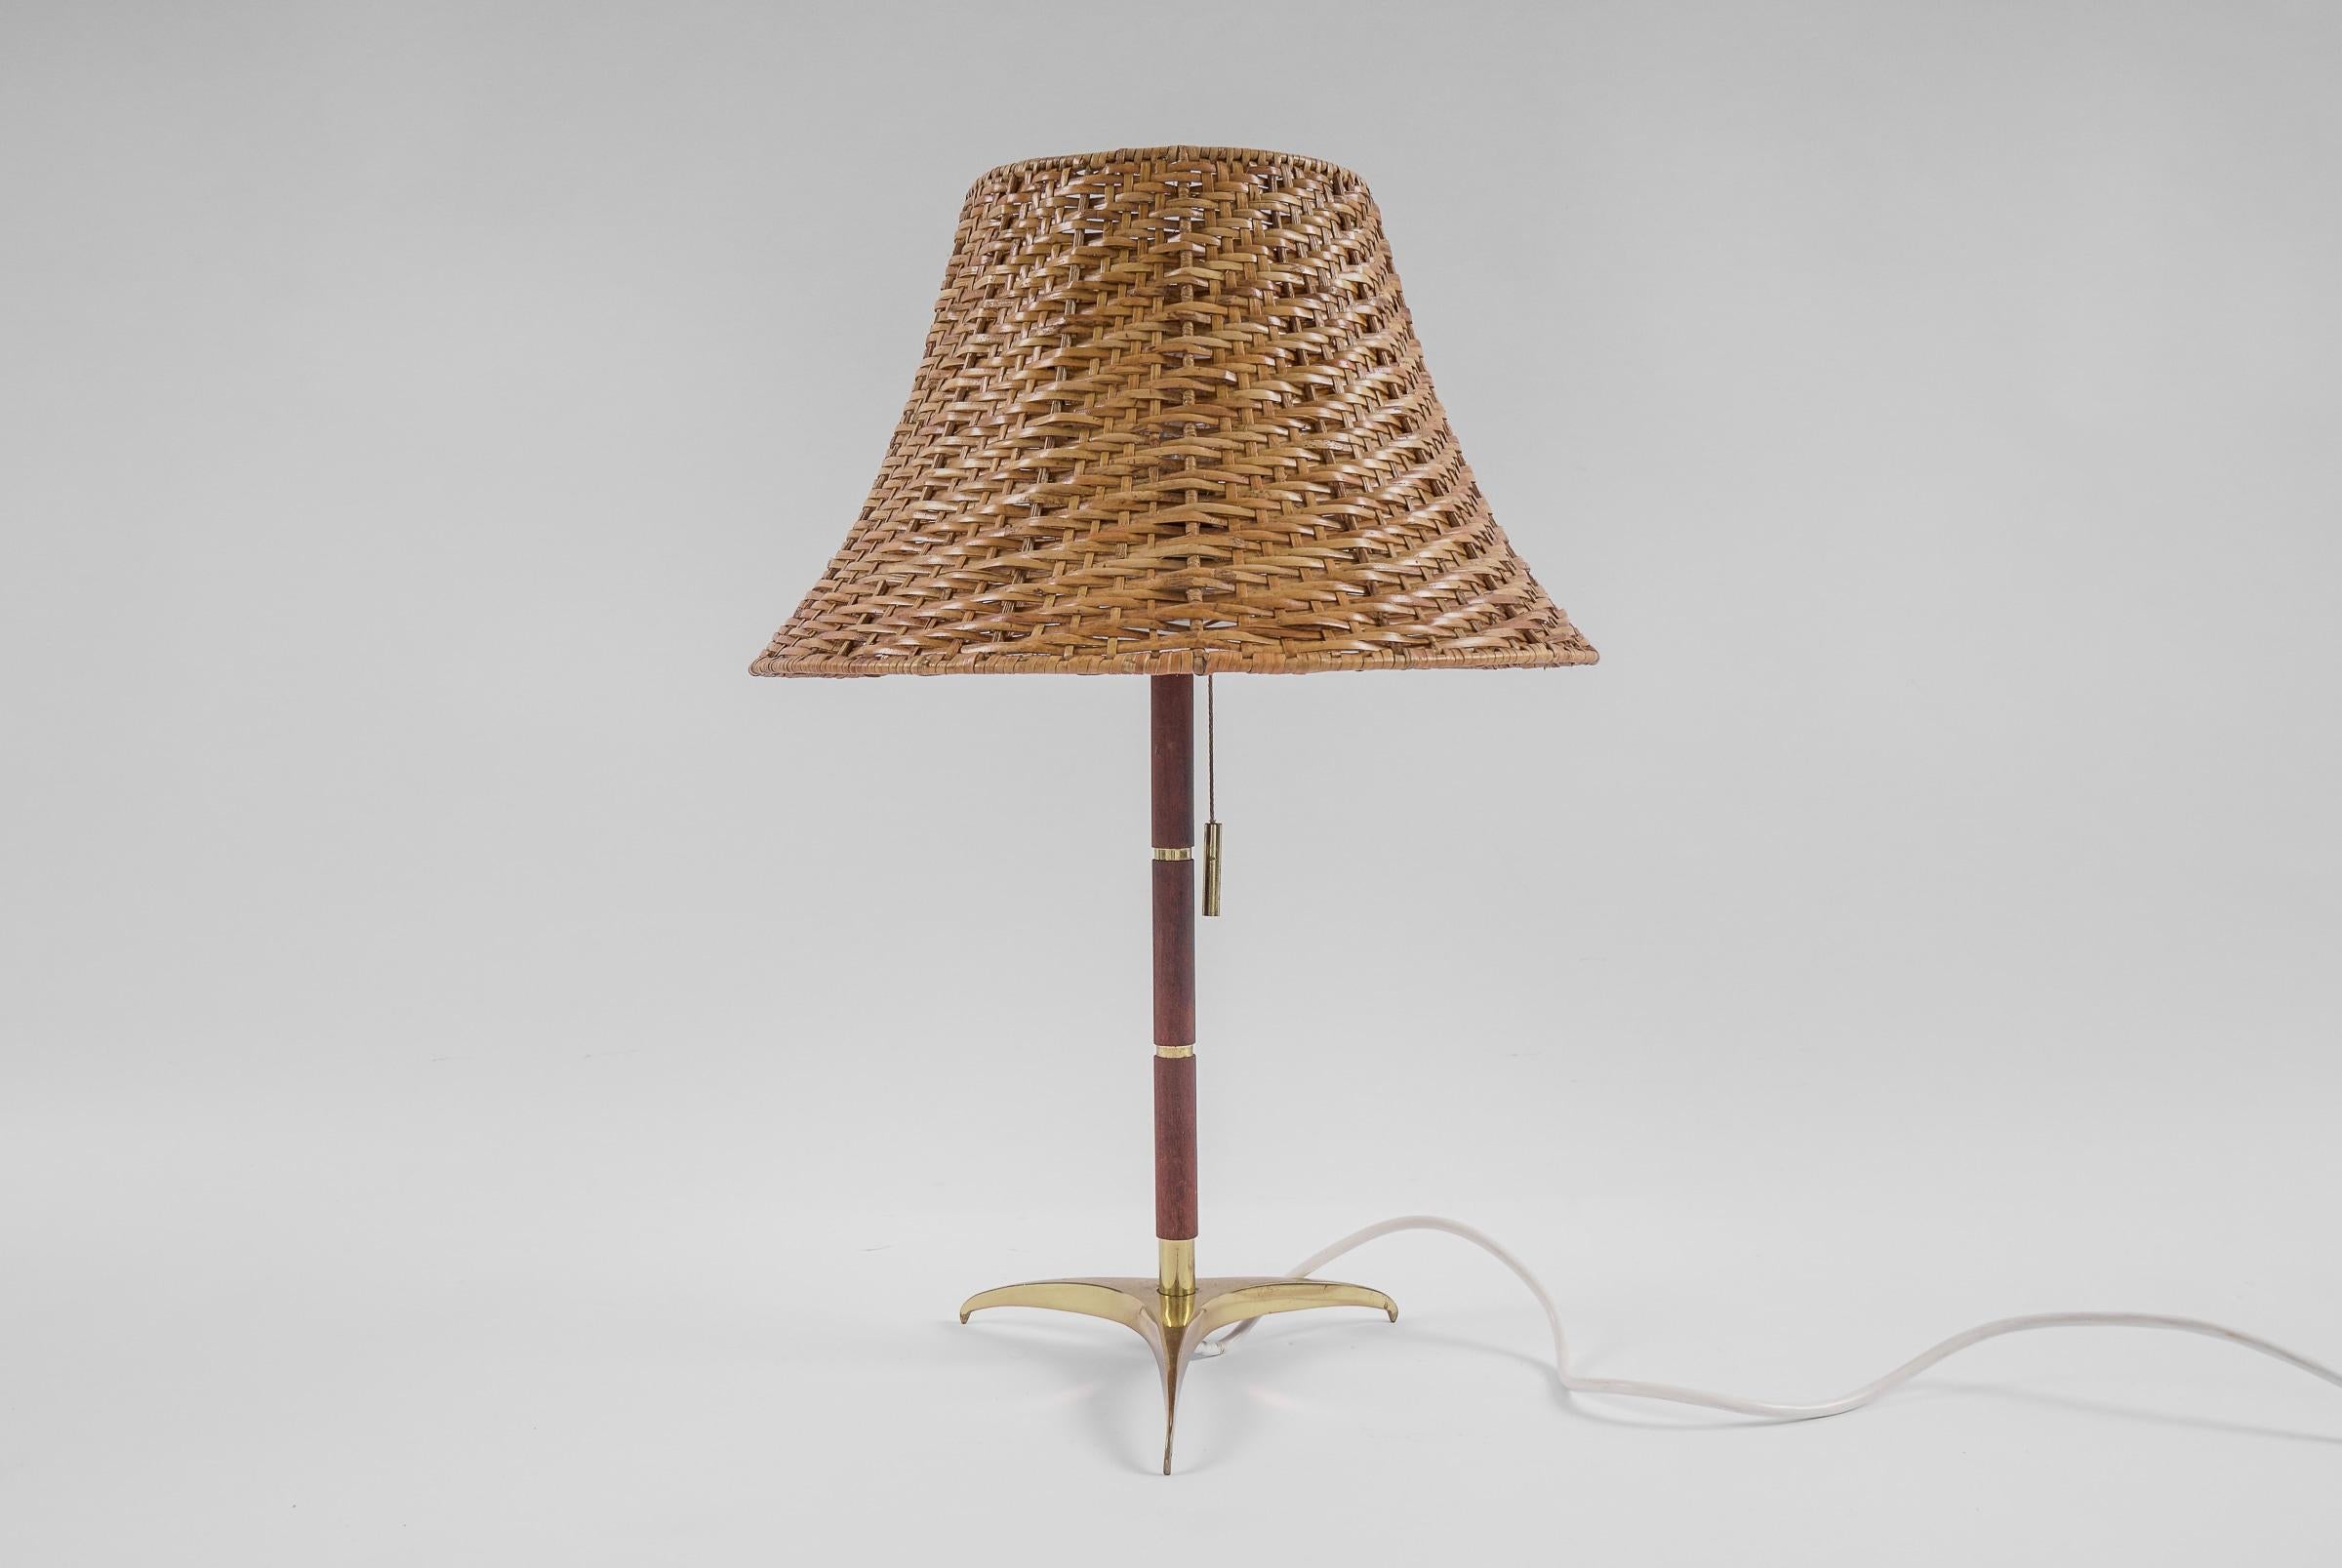 Lovely Mid-Century Modern Table Lamp in Brass, Wicker and Teak, 1950s, Austria

A premium maretial mix of brass, teak and wicker.

The color combination and proportions are perfect.

Light bulbs are not included.
